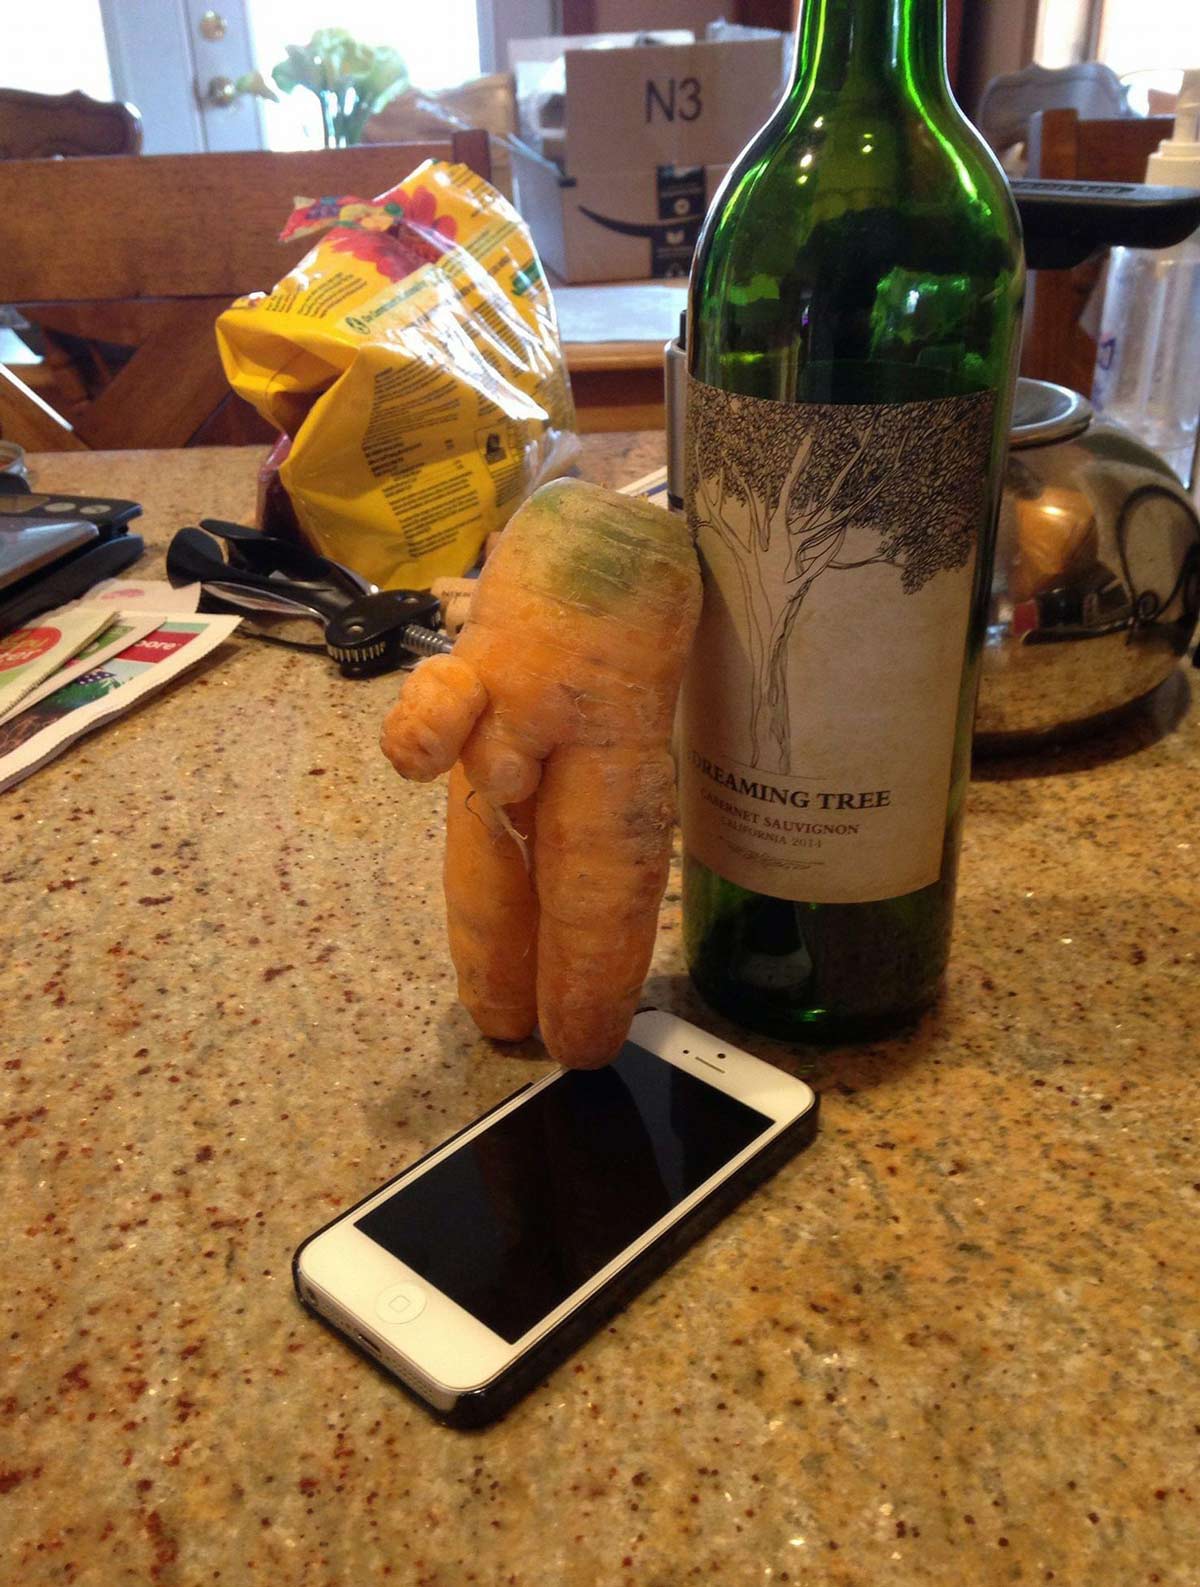 My mom’s carrot from her produce box